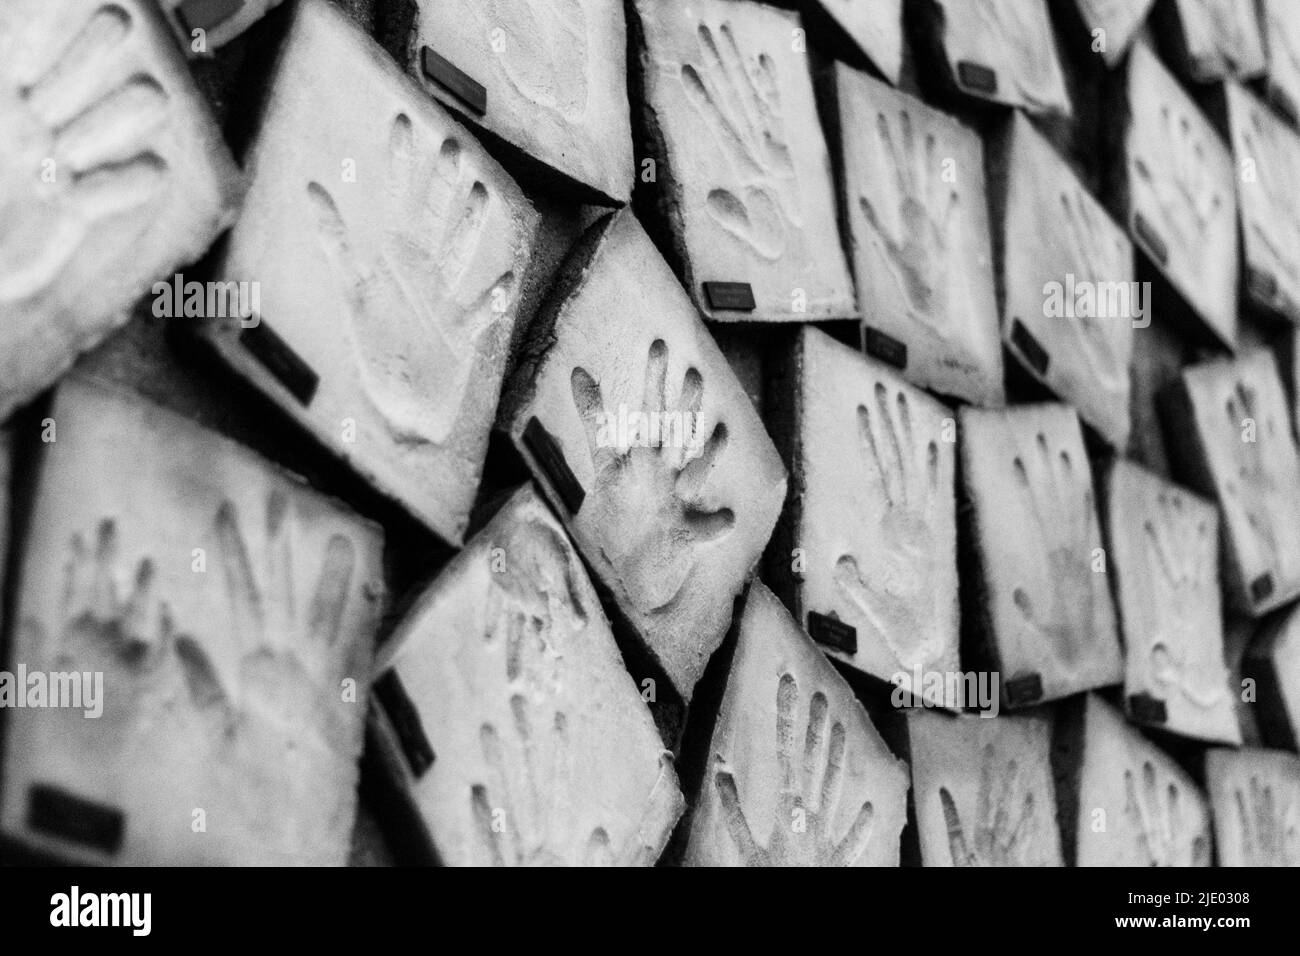 Wall covered with hand molds, humanity, memoirs of social life. Human wall of hands. Community mural with hands of children's. Stock Photo